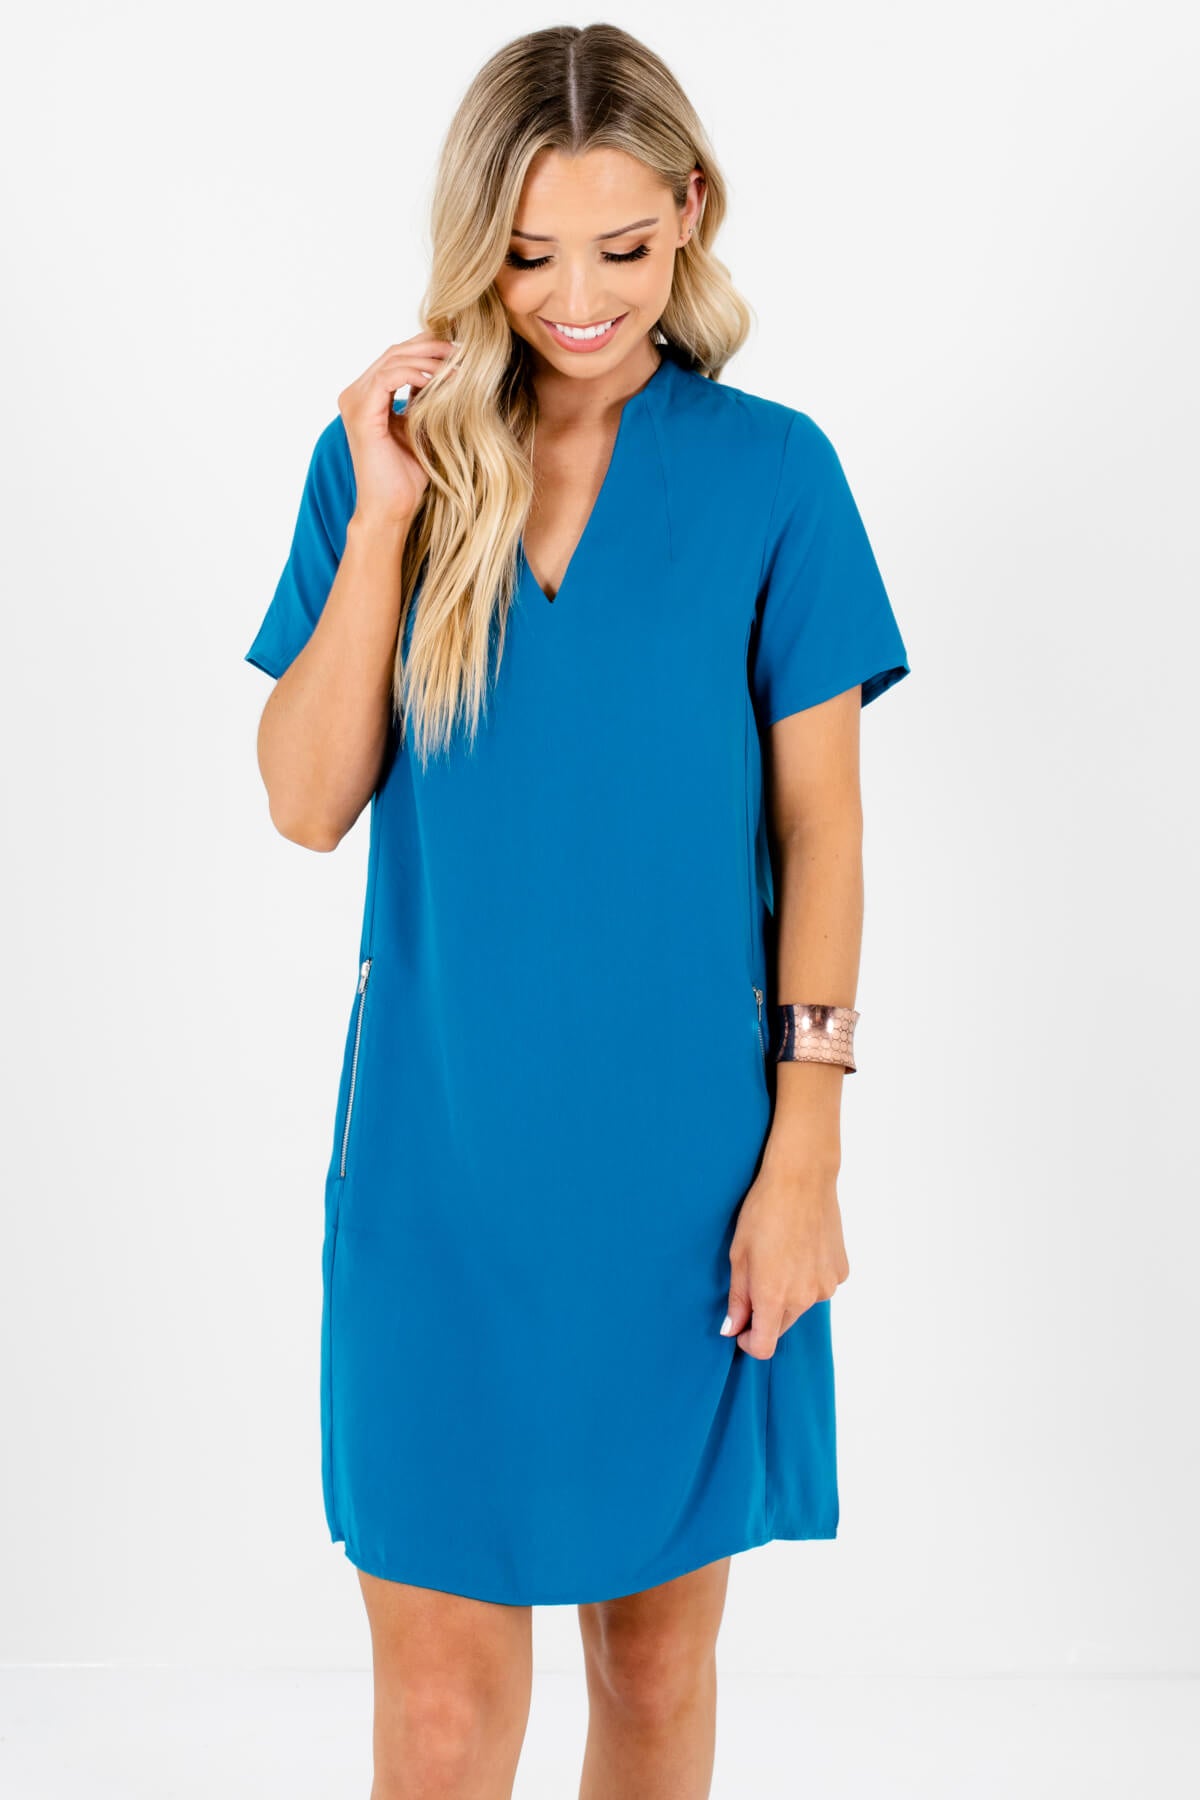 Womens Business Casual Blue Mini Dresses with Pockets